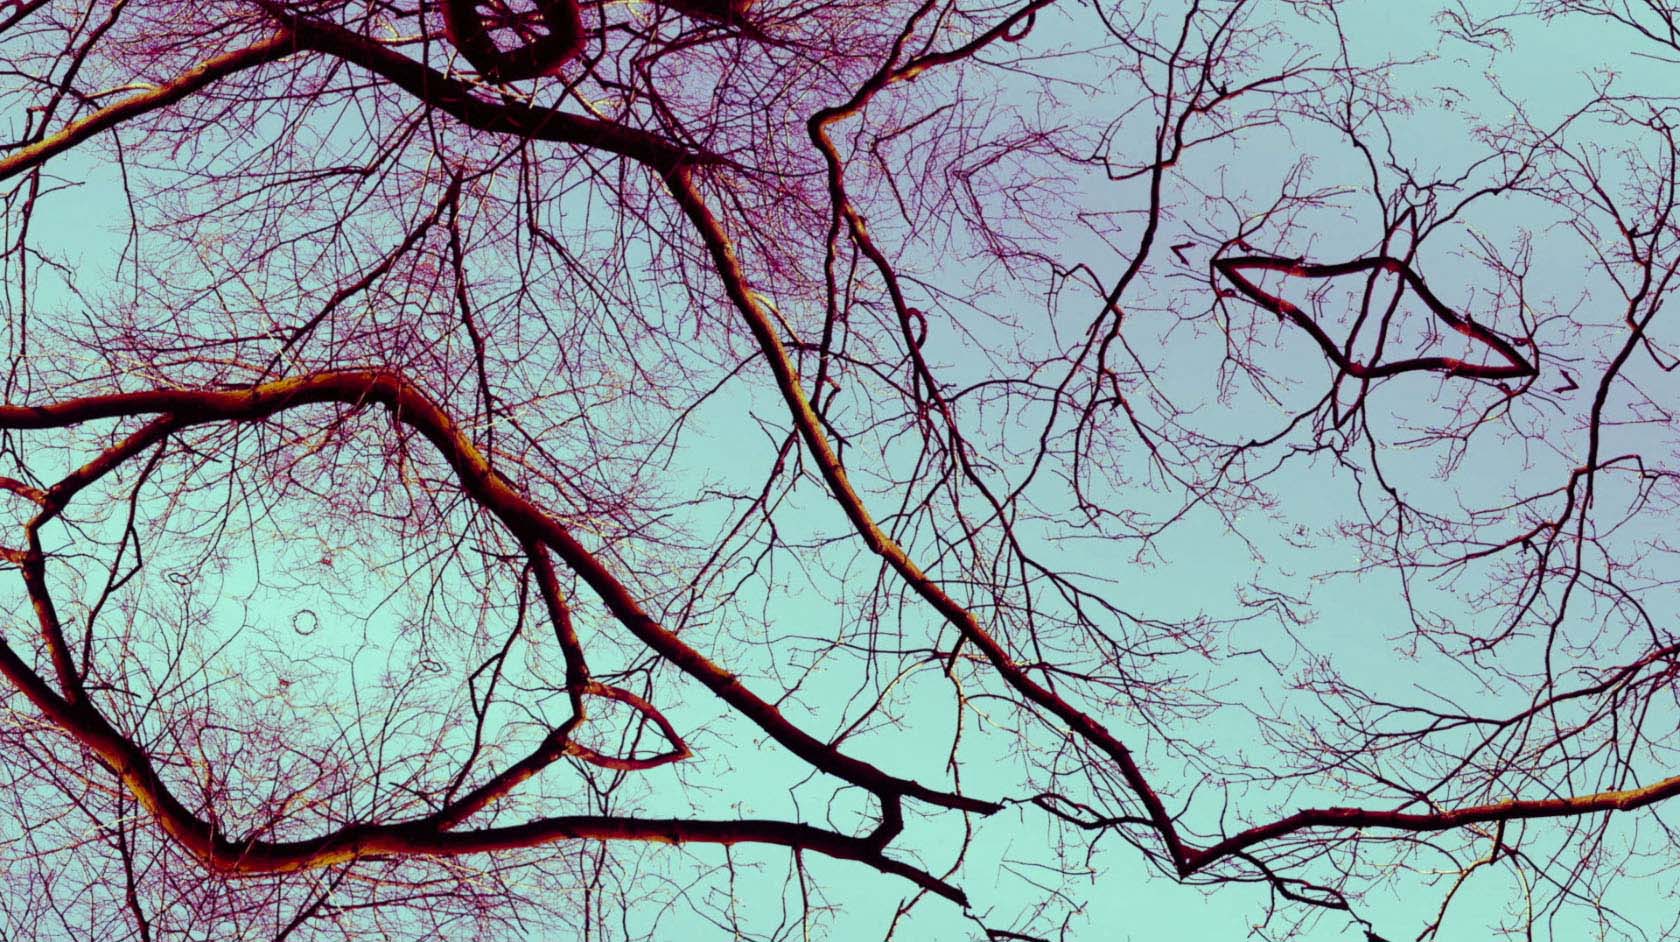 interwoven branches of trees in neon colors against blue sky